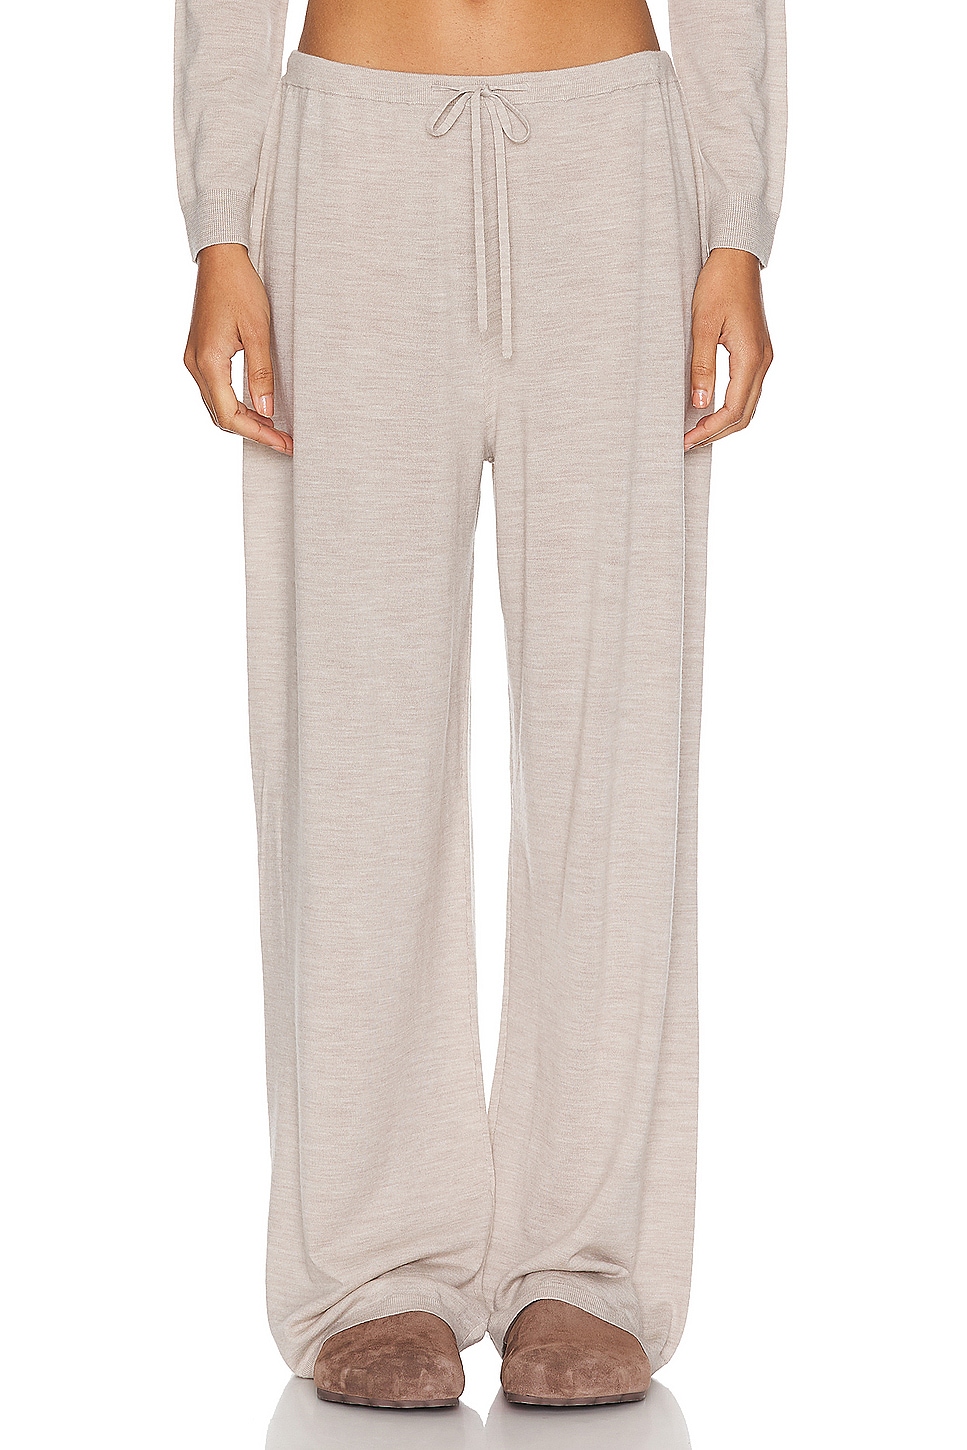 Image 1 of LESET James Drawstring Pant in Oatmeal